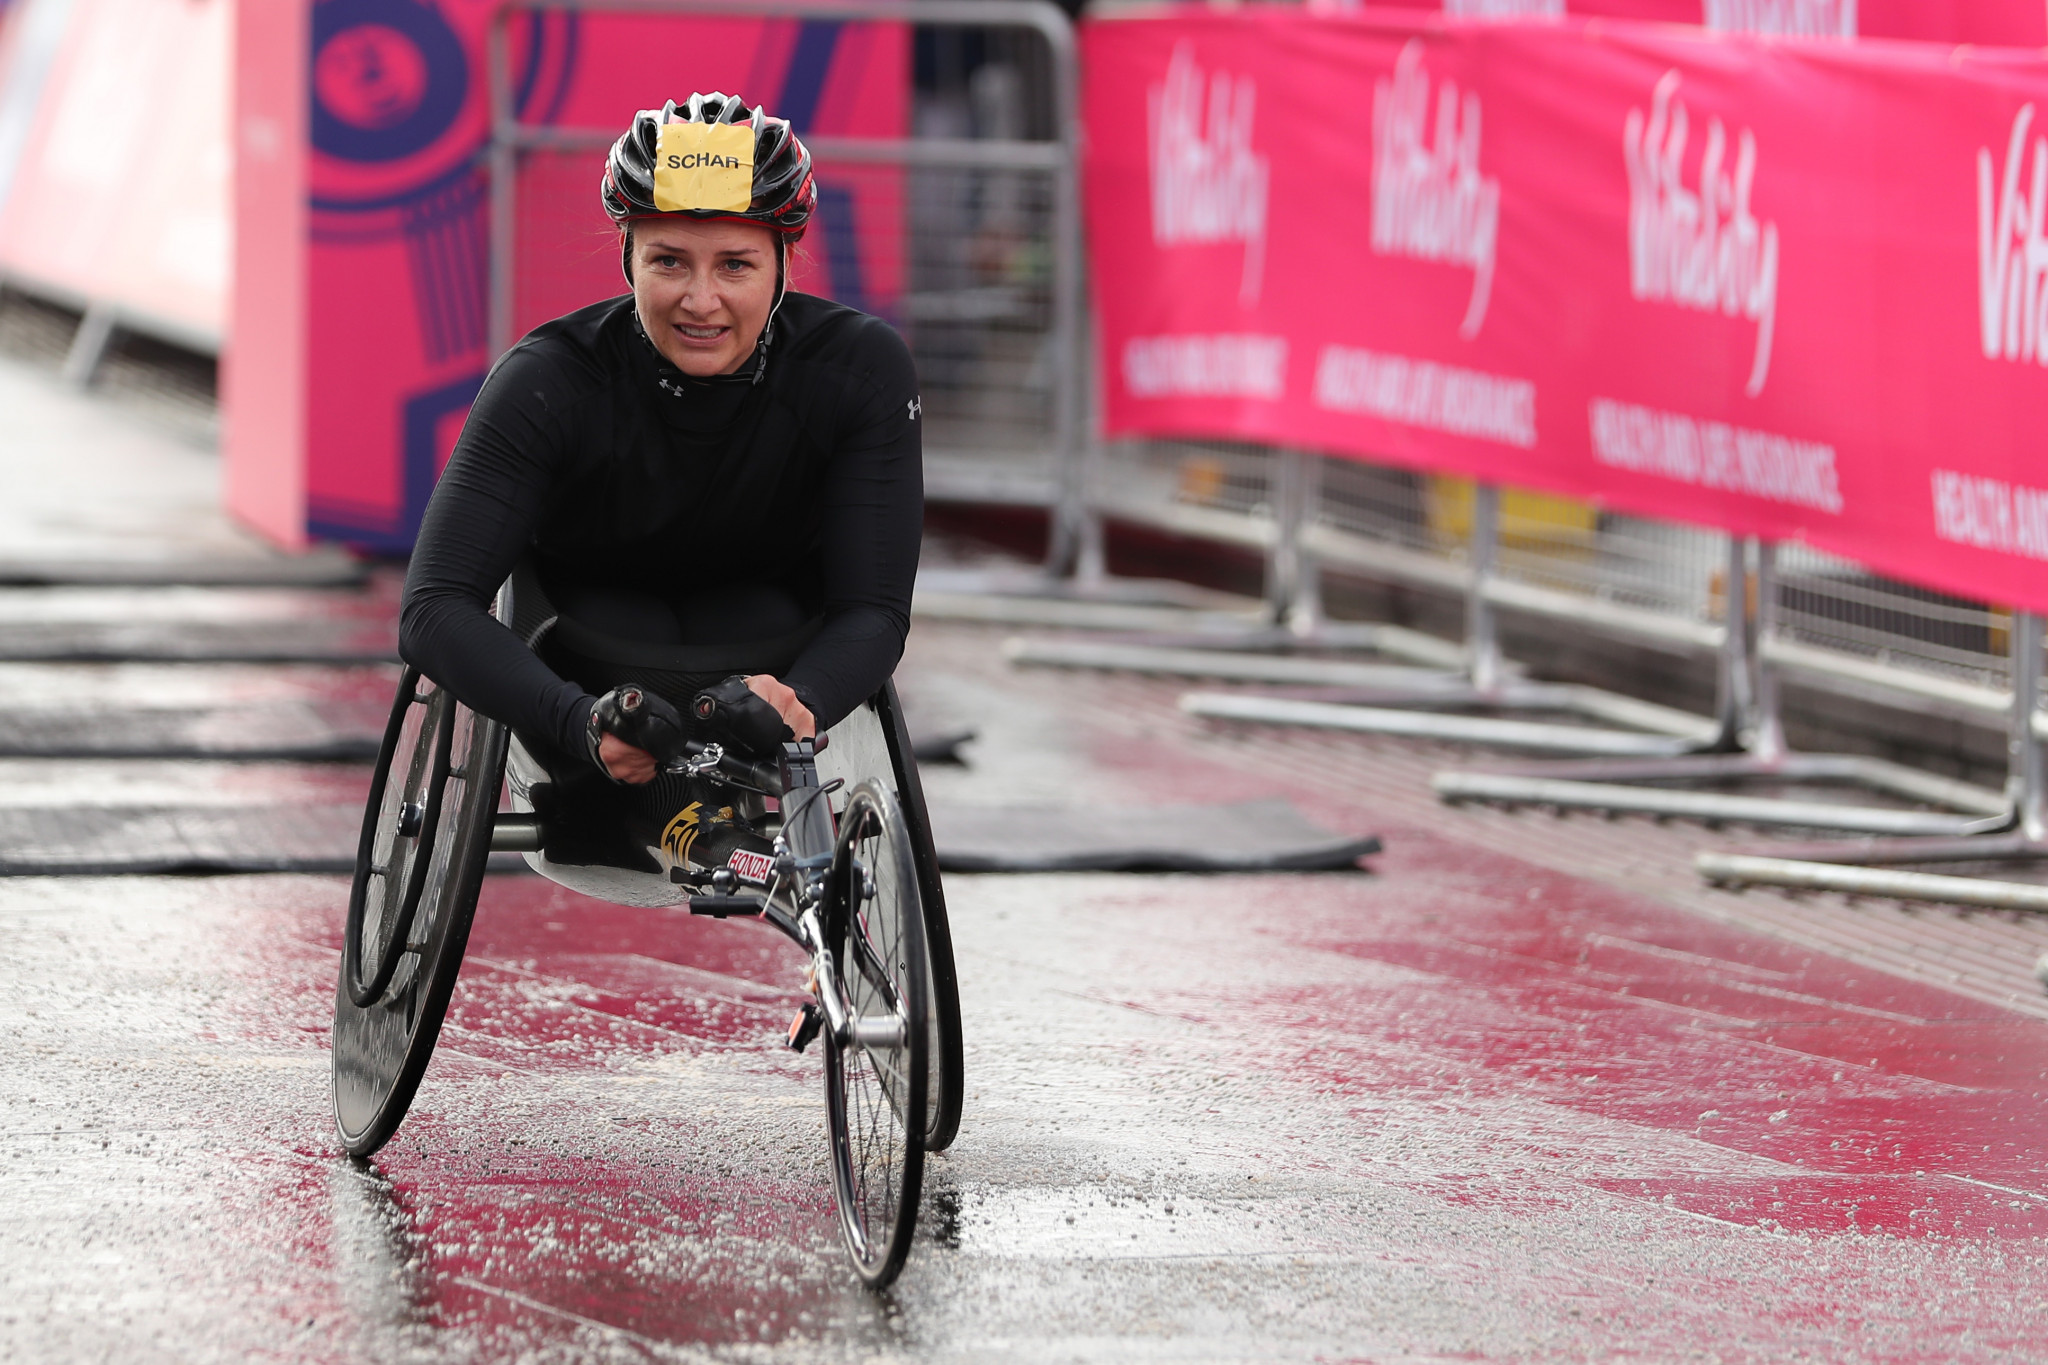 Athletes descend on Nottwil for fifth World Para Athletics Grand Prix of the year